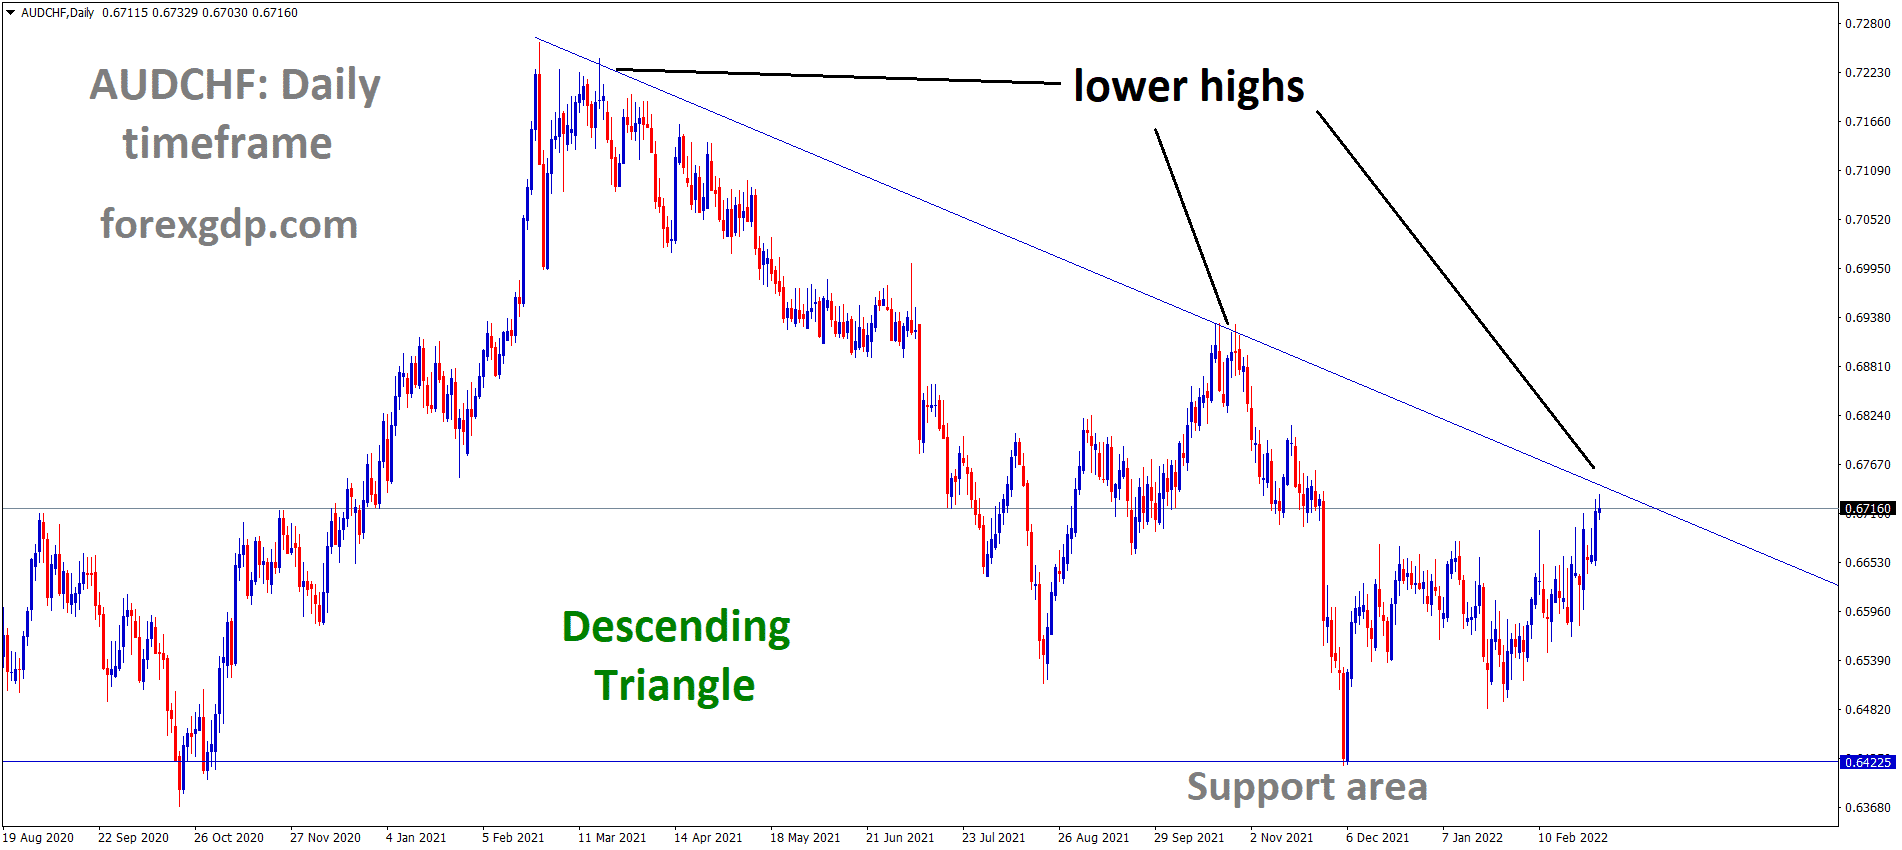 AUDCHF is moving in the Descending triangle pattern and the market has reached the lower high area of the Triangle pattern.